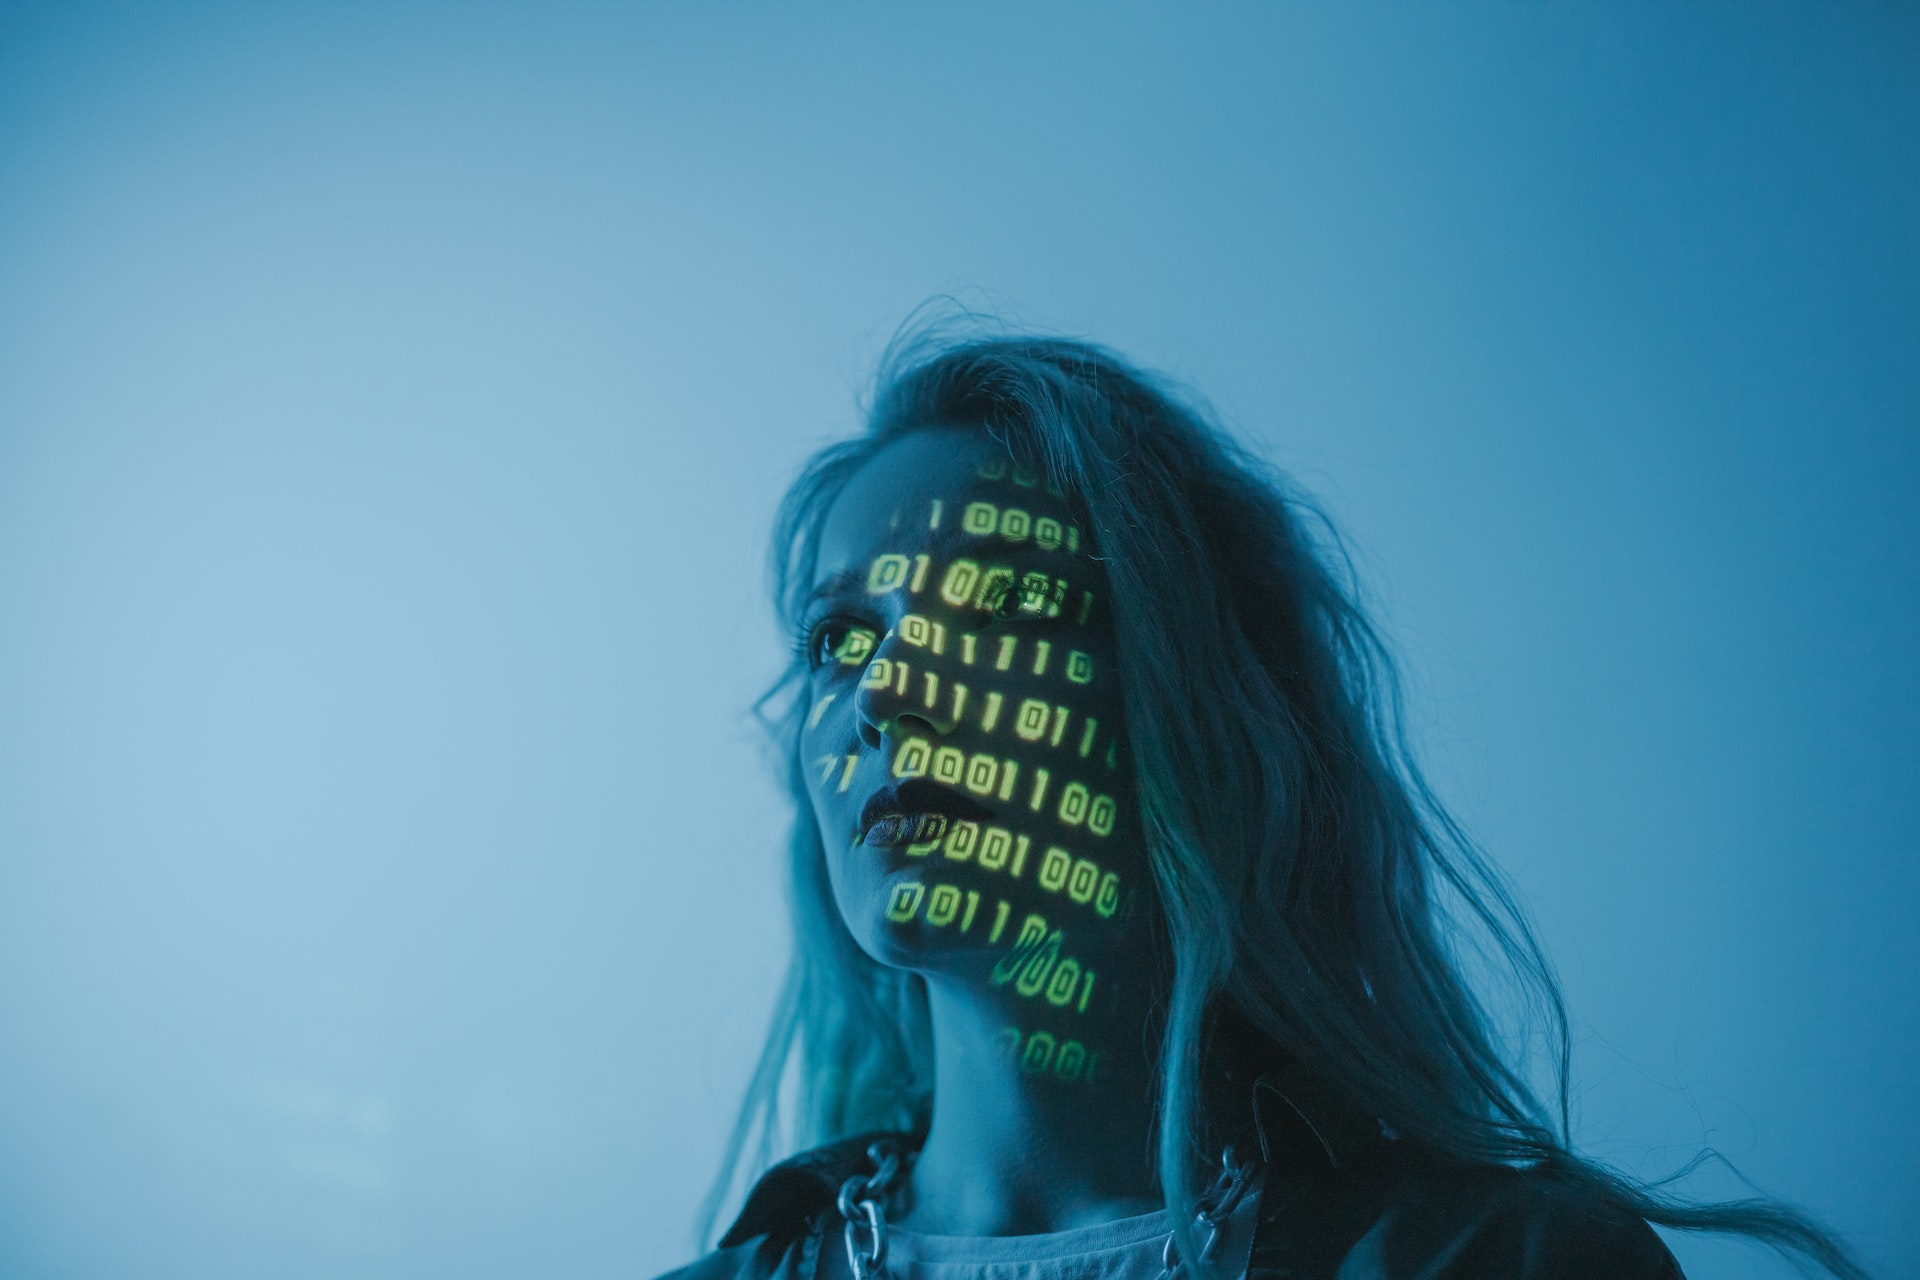 Profile of woman with computer code being projected onto her face